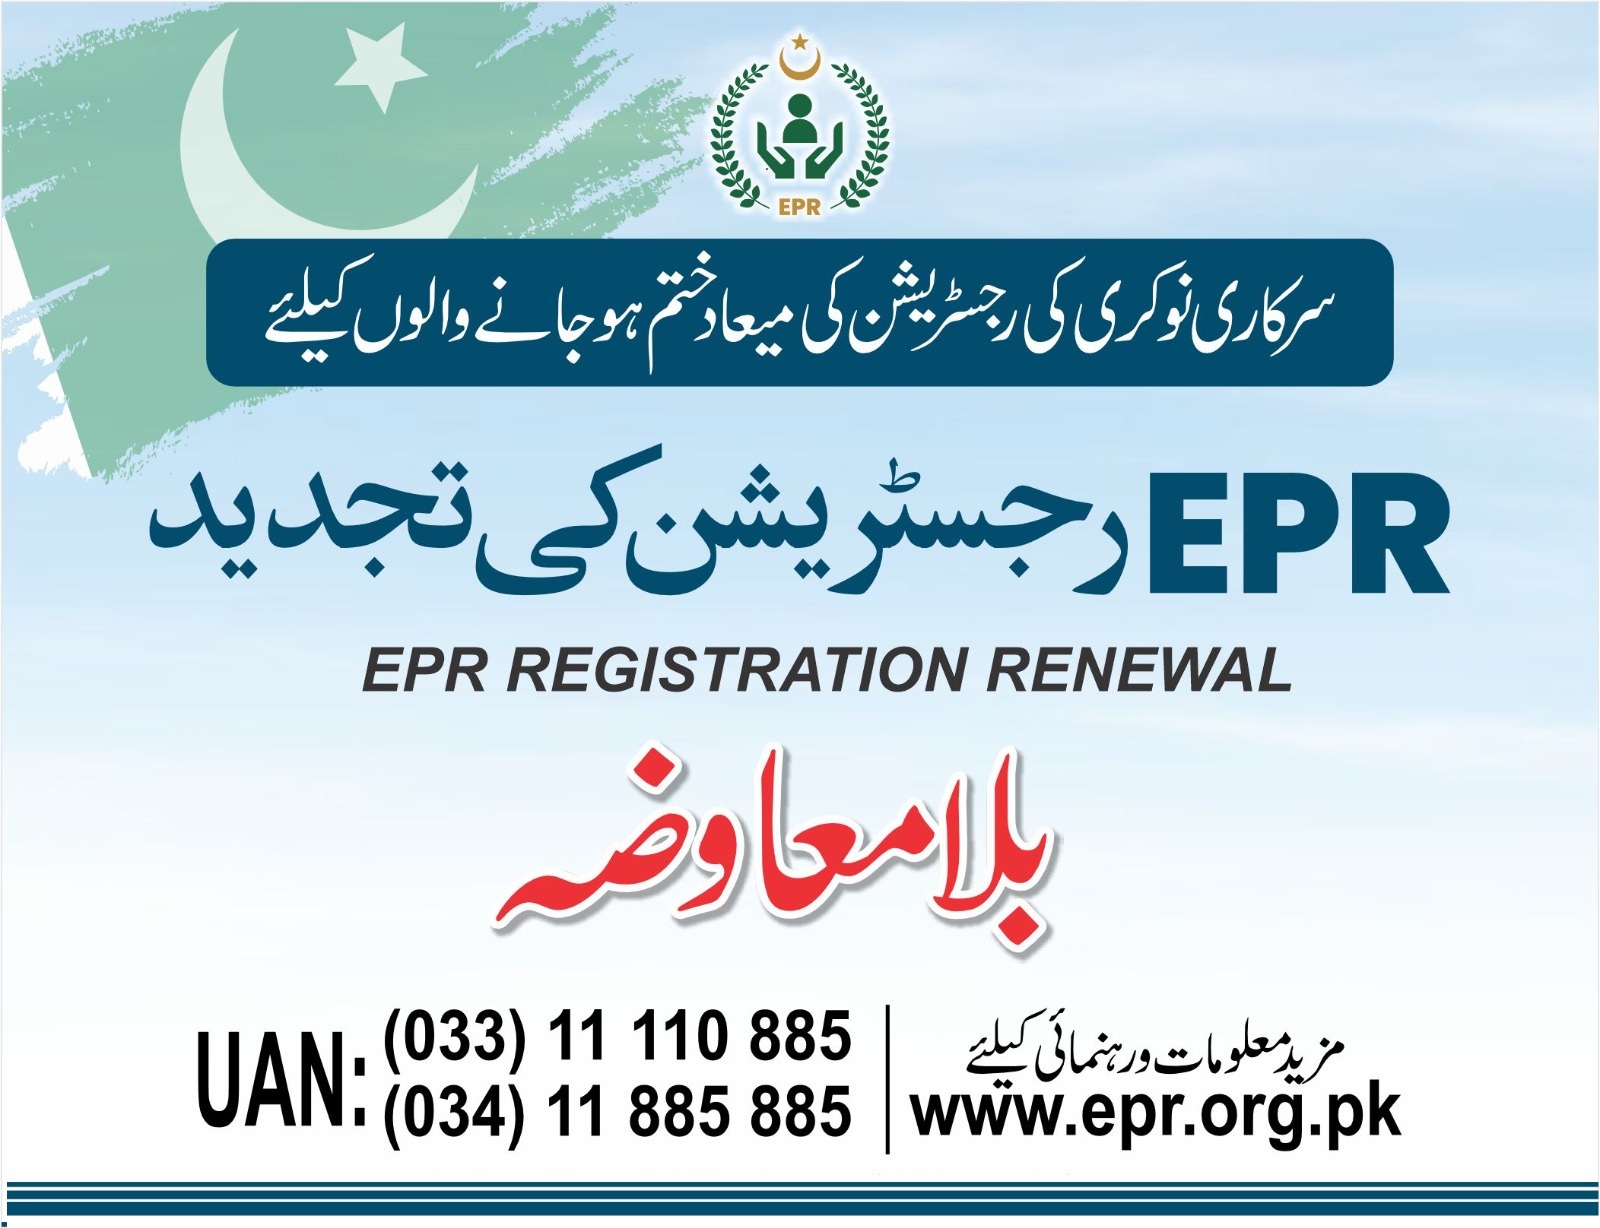 EPR News Gallery | EPR Announced Government Jobs Facilitation Registration Renewal Free of Cost